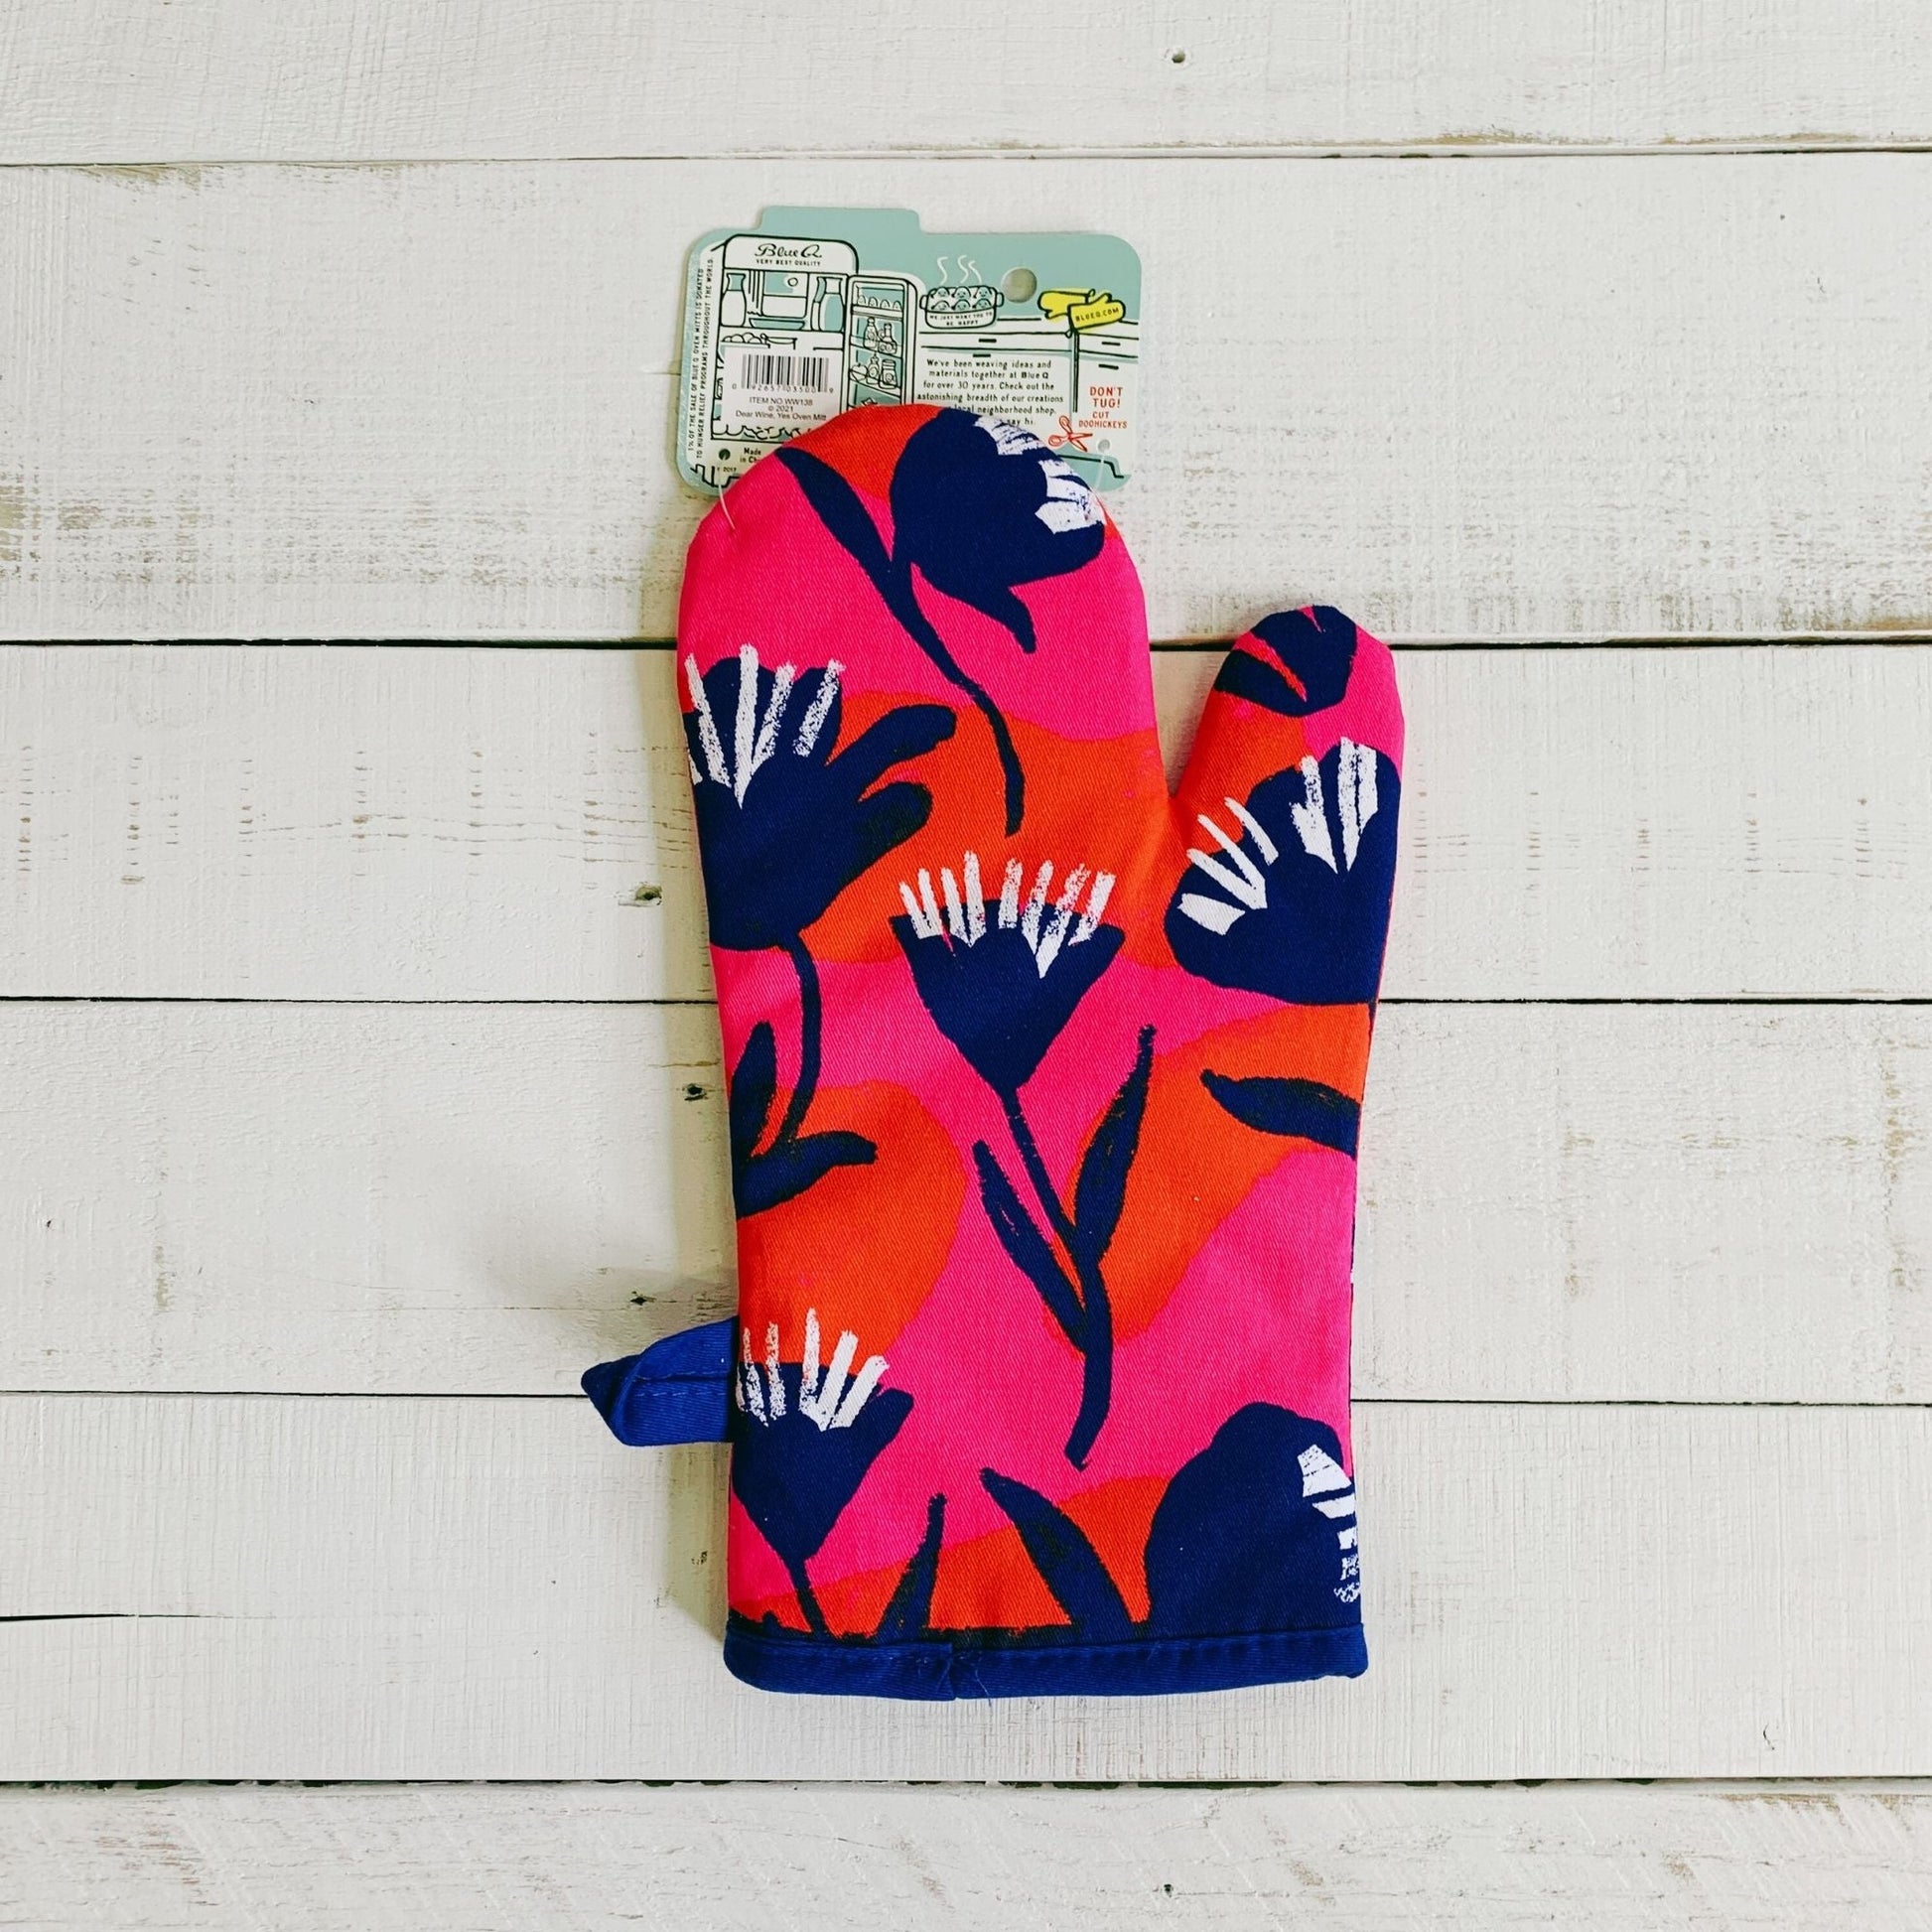 Dear Wine, Yes Thermal Oven Mitt | Kitchen Thermal Single Pot Holder